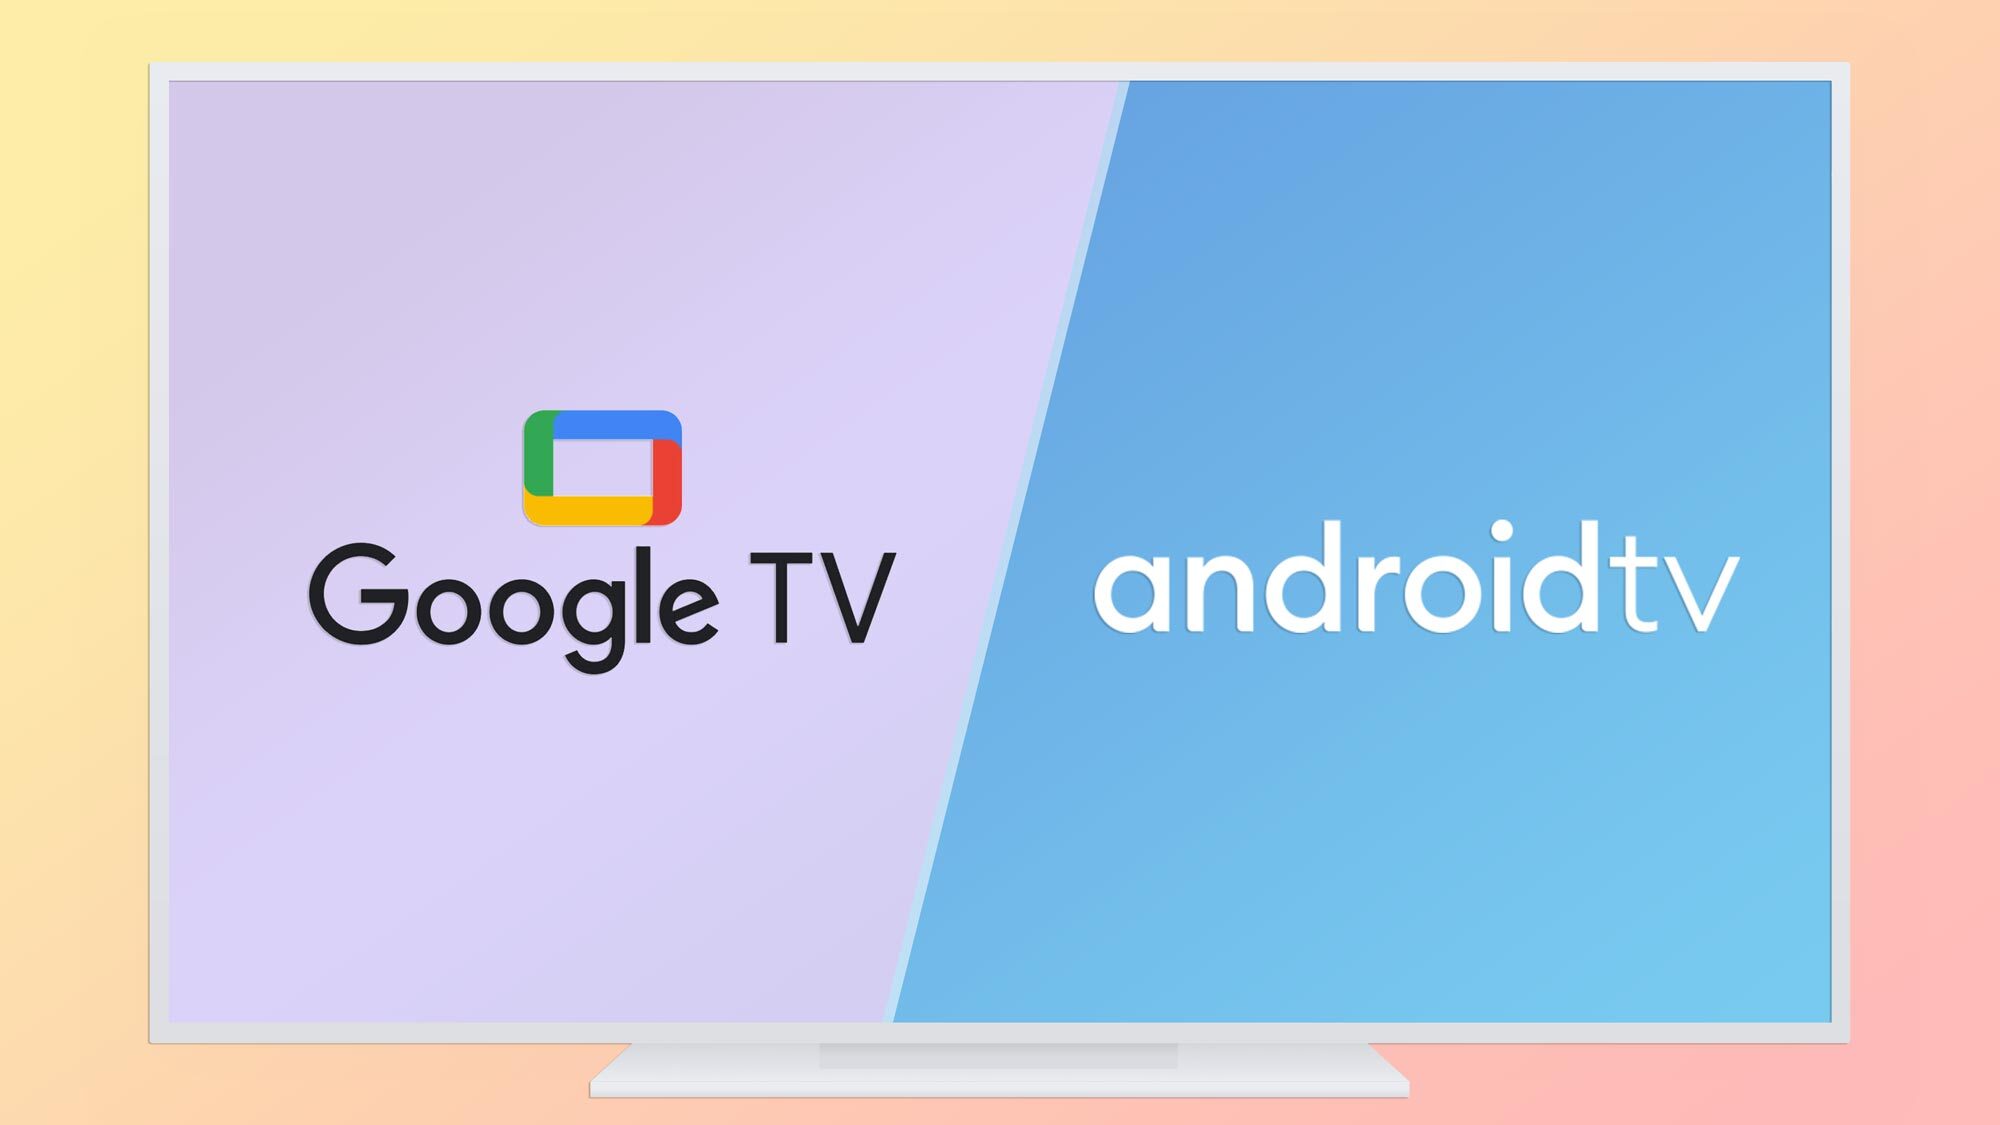 google-tv-vs-android-tv-whats-the-difference